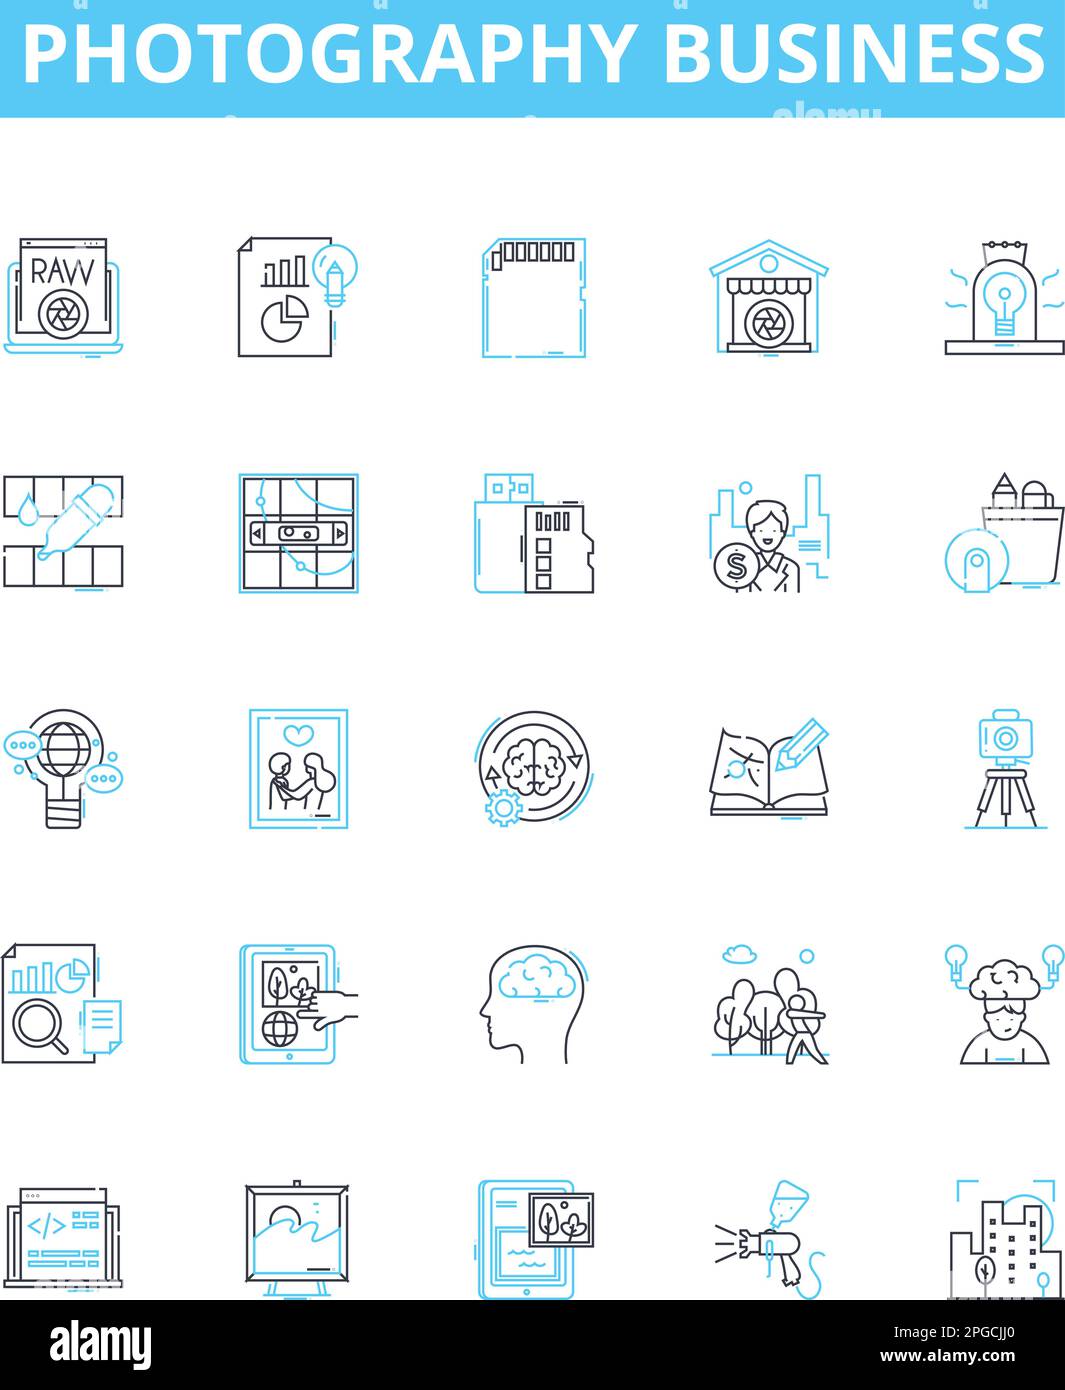 photography business vector line icons set. Photography, Business, Studio, Capture, Camera, Shots, Images illustration outline concept symbols and Stock Vector